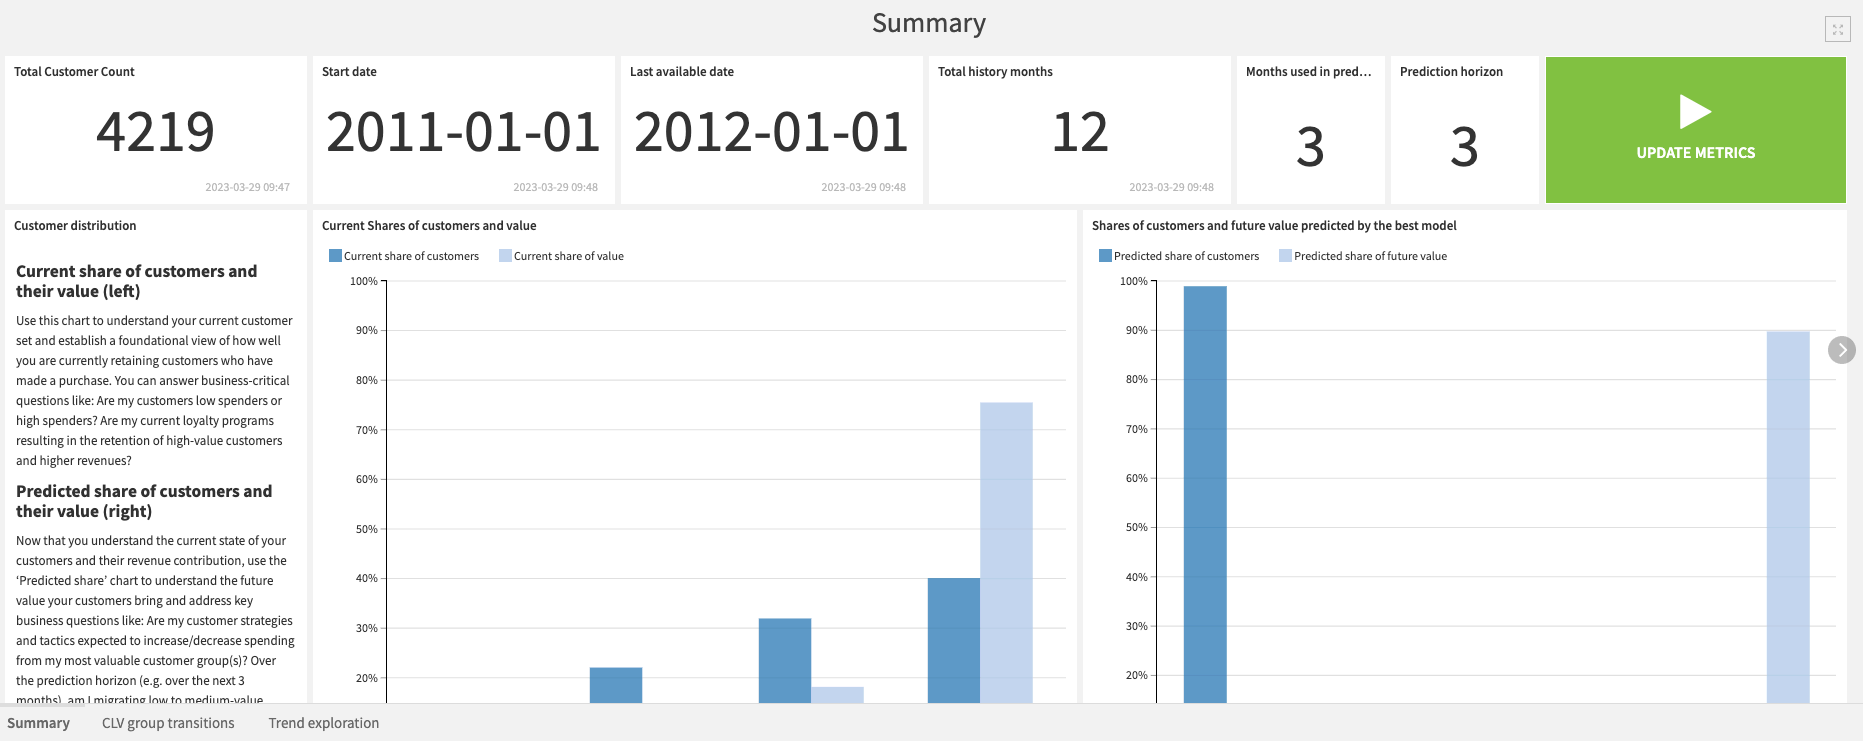 Dataiku screenshot of summary data in the Business Insights Dashboard used to explore our CLV predictions